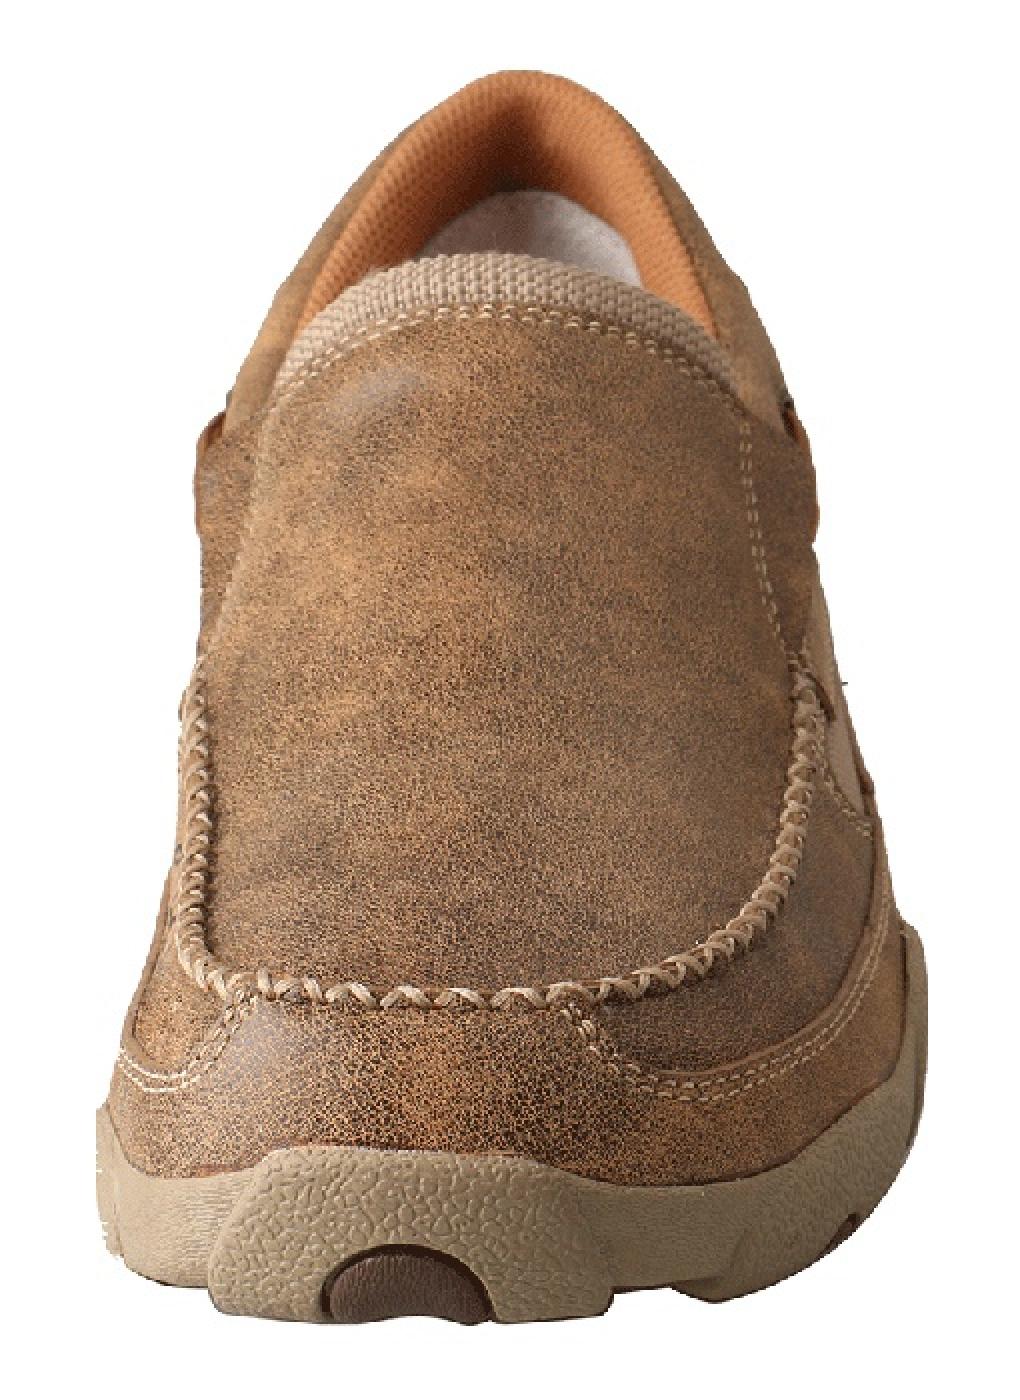 Twisted X Men's Original Slip-On Driving Moc Front View